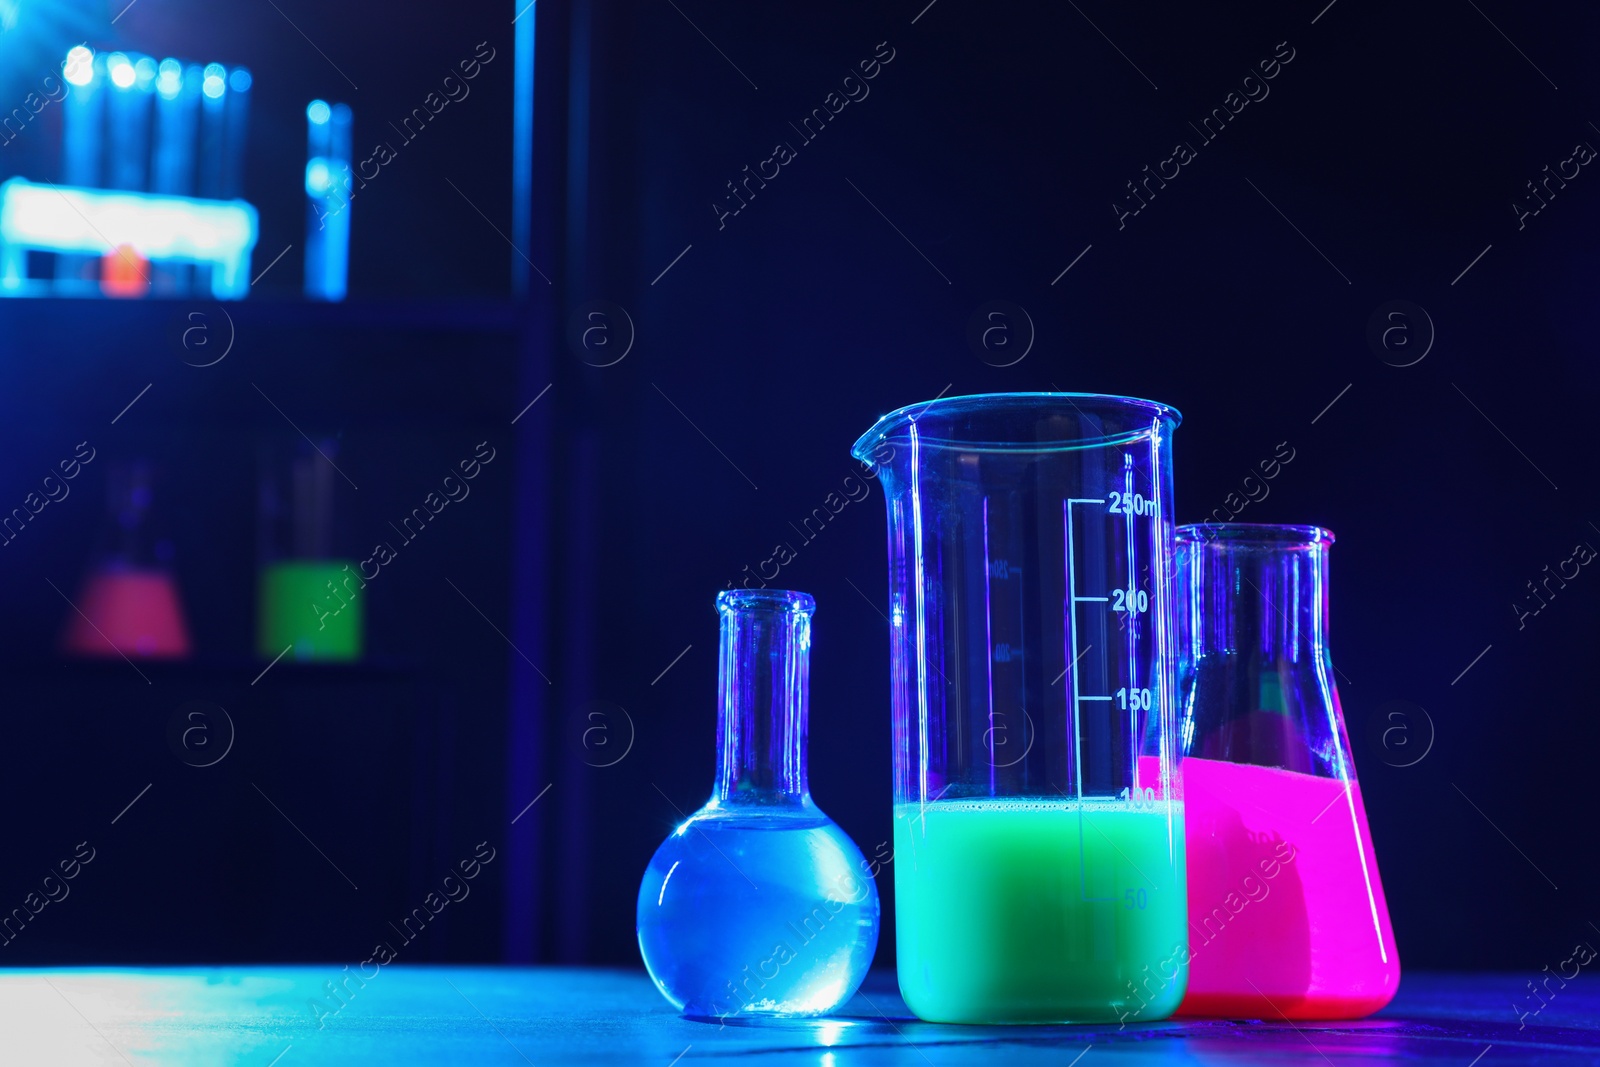 Photo of Laboratory glassware with luminous liquids on table, space for text